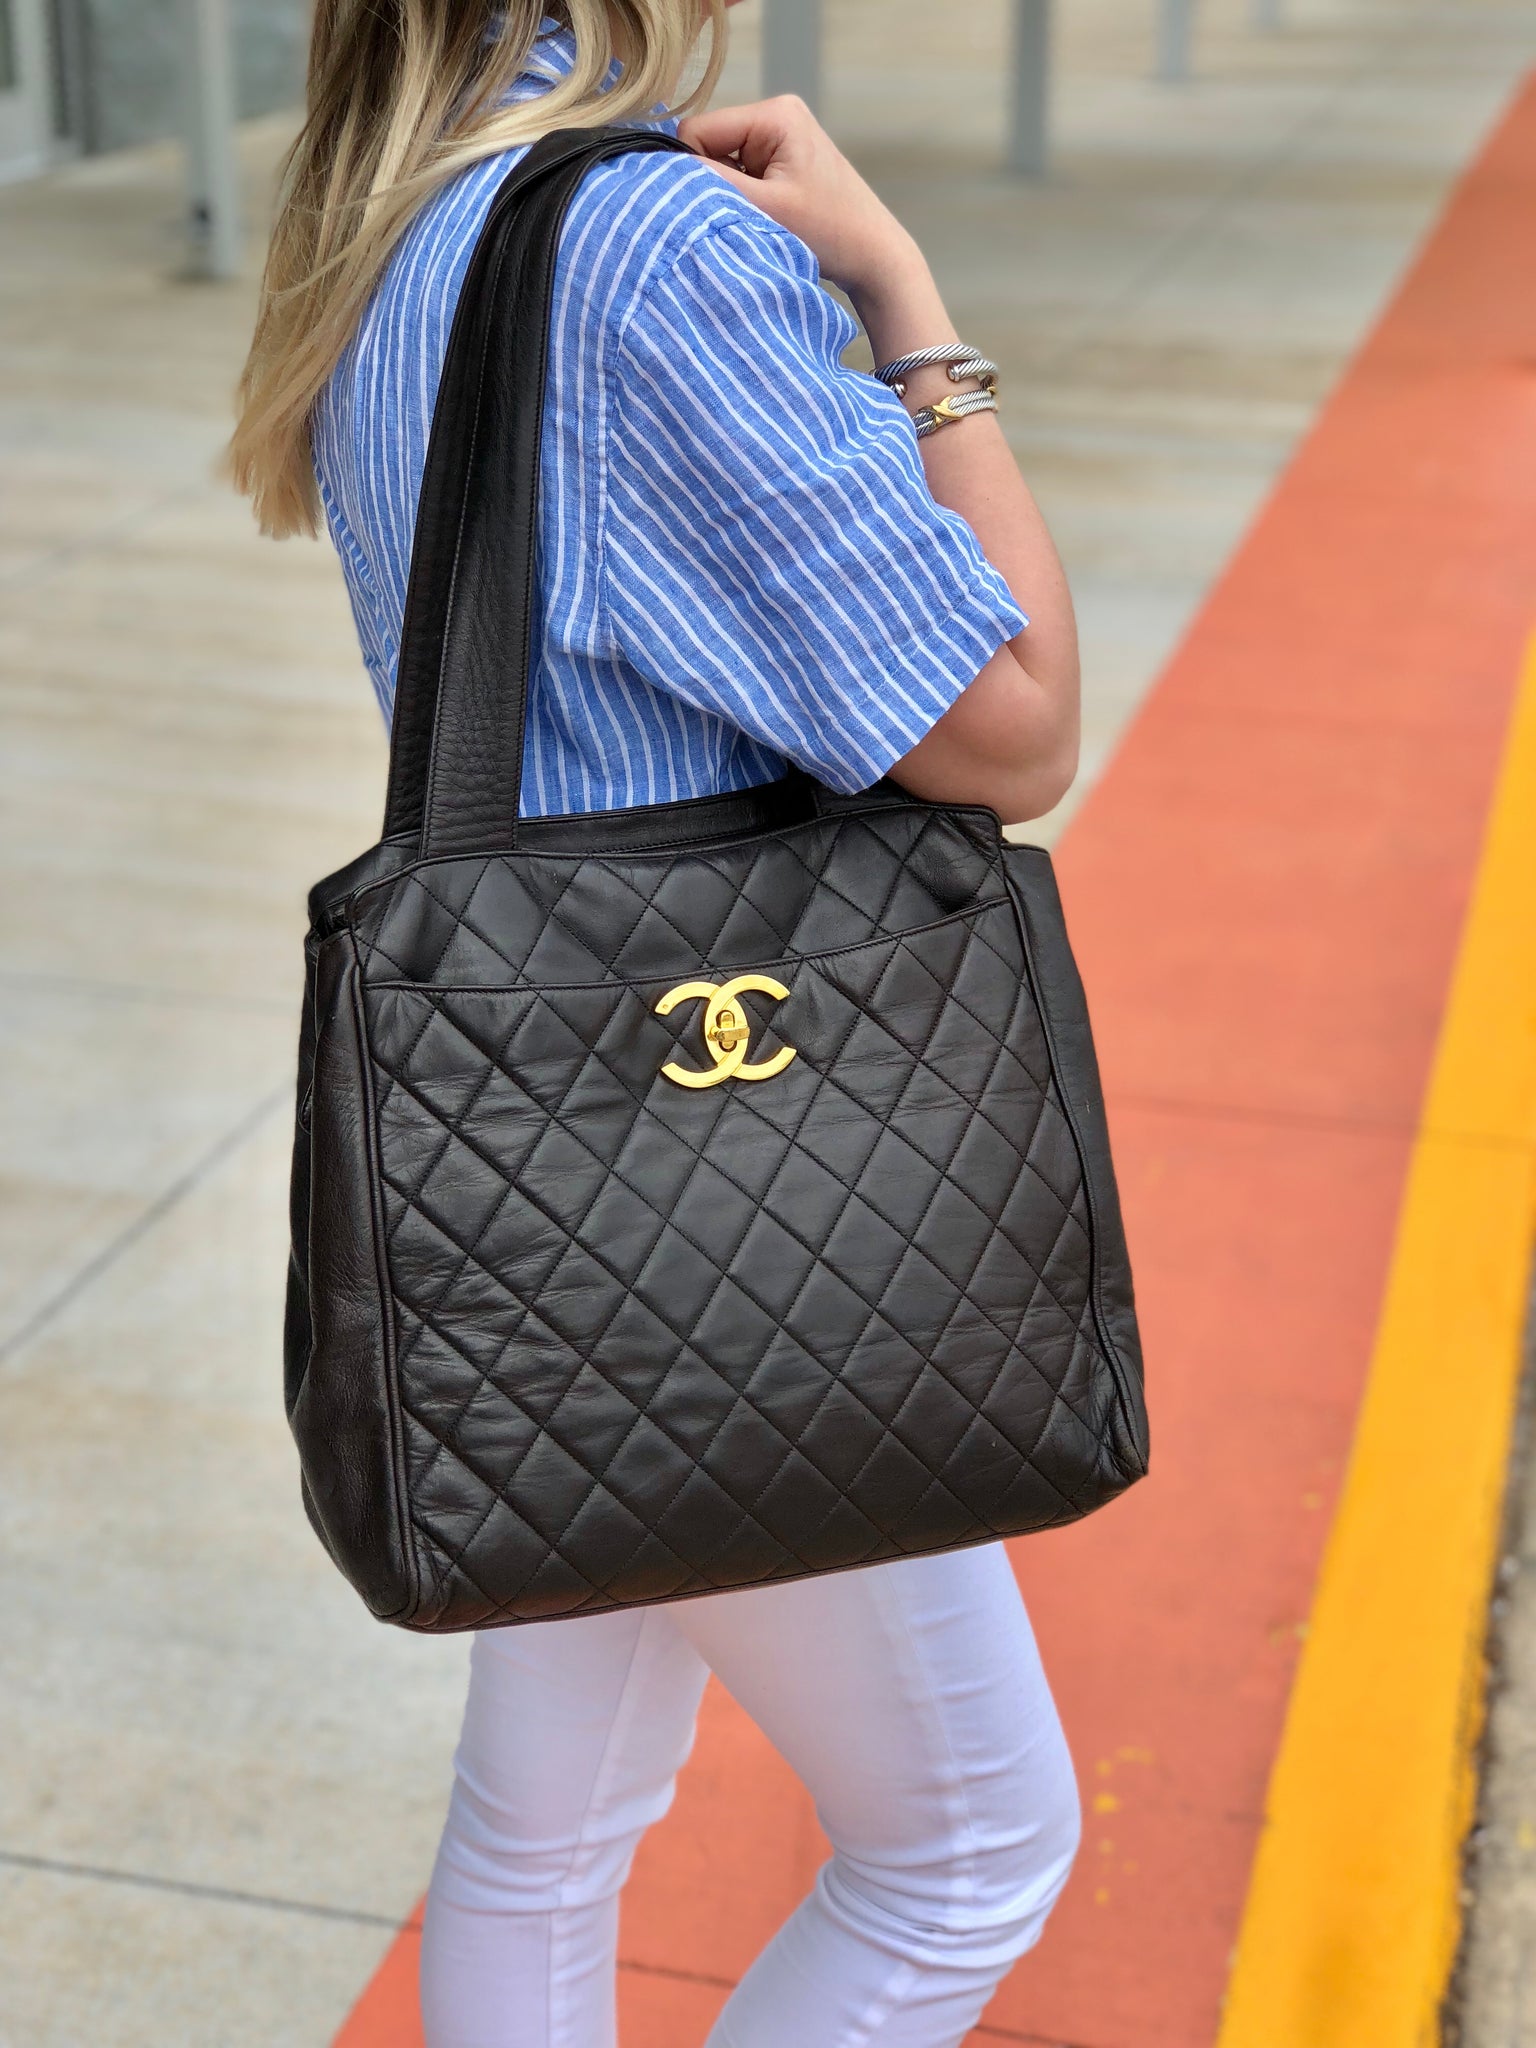 CHANEL Dark Gray Quilted Puffy Leather Shoulder Bag Tote